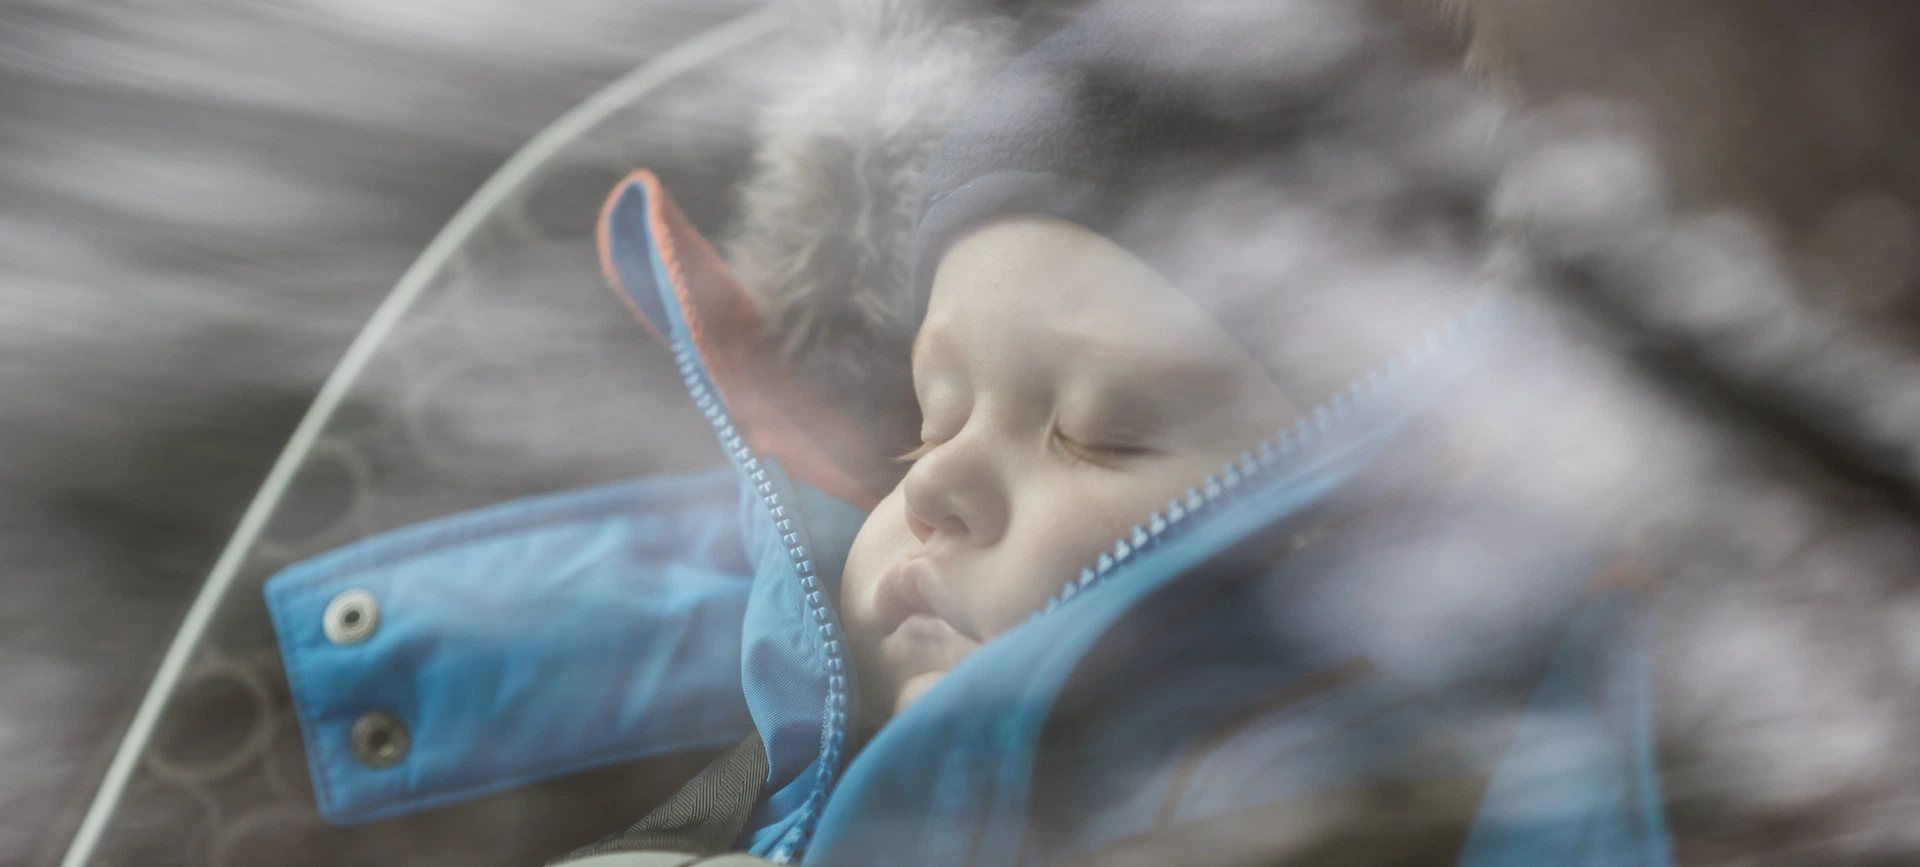 A child sleeps deeply in a car, thanks to sound insulation glass reducing outside noise and enhancing comfort.